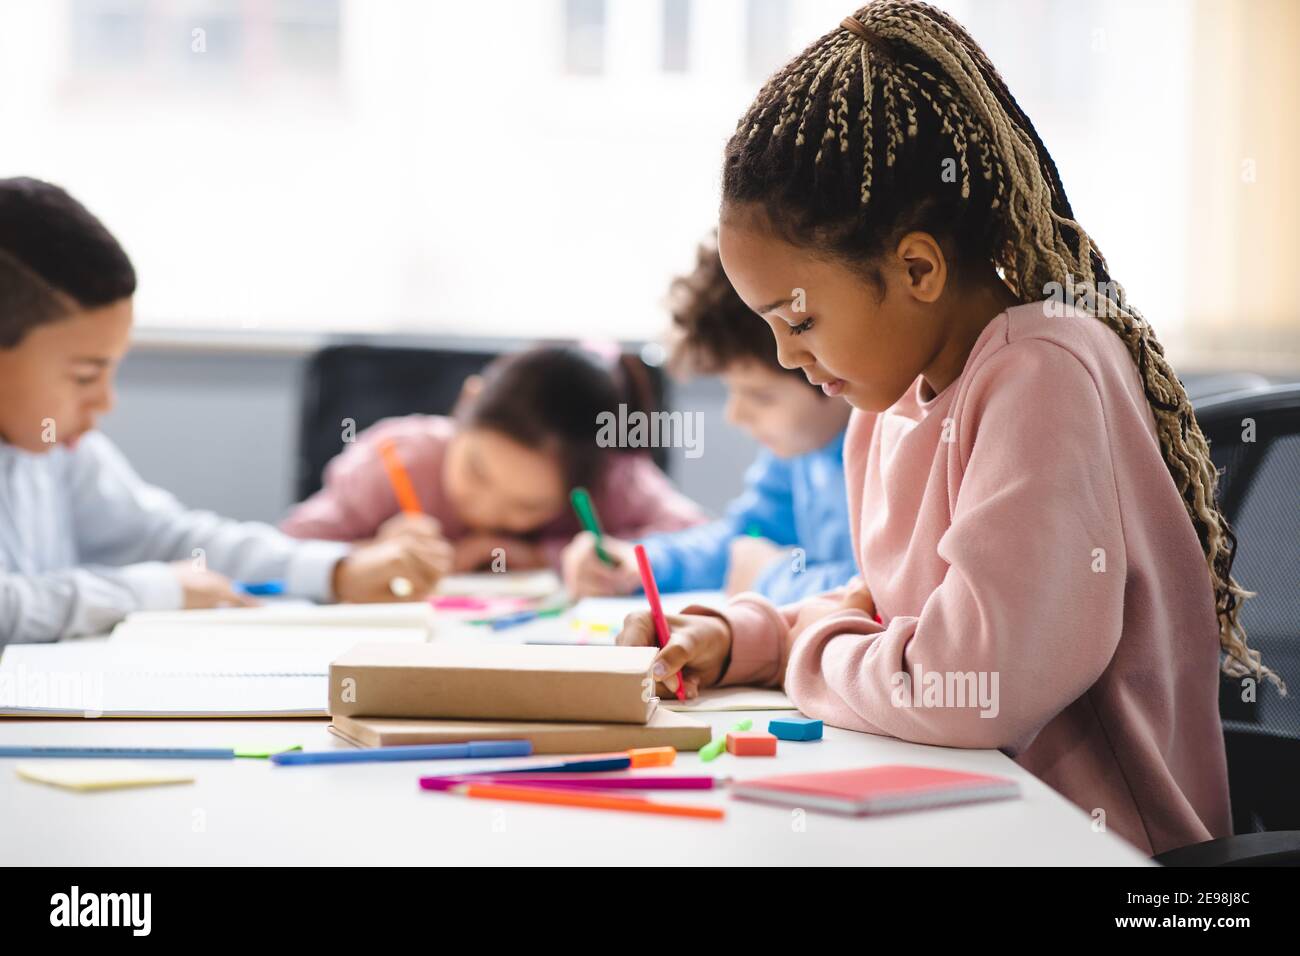 Portrait of small black girl sitting at desk in classroom Stock Photo